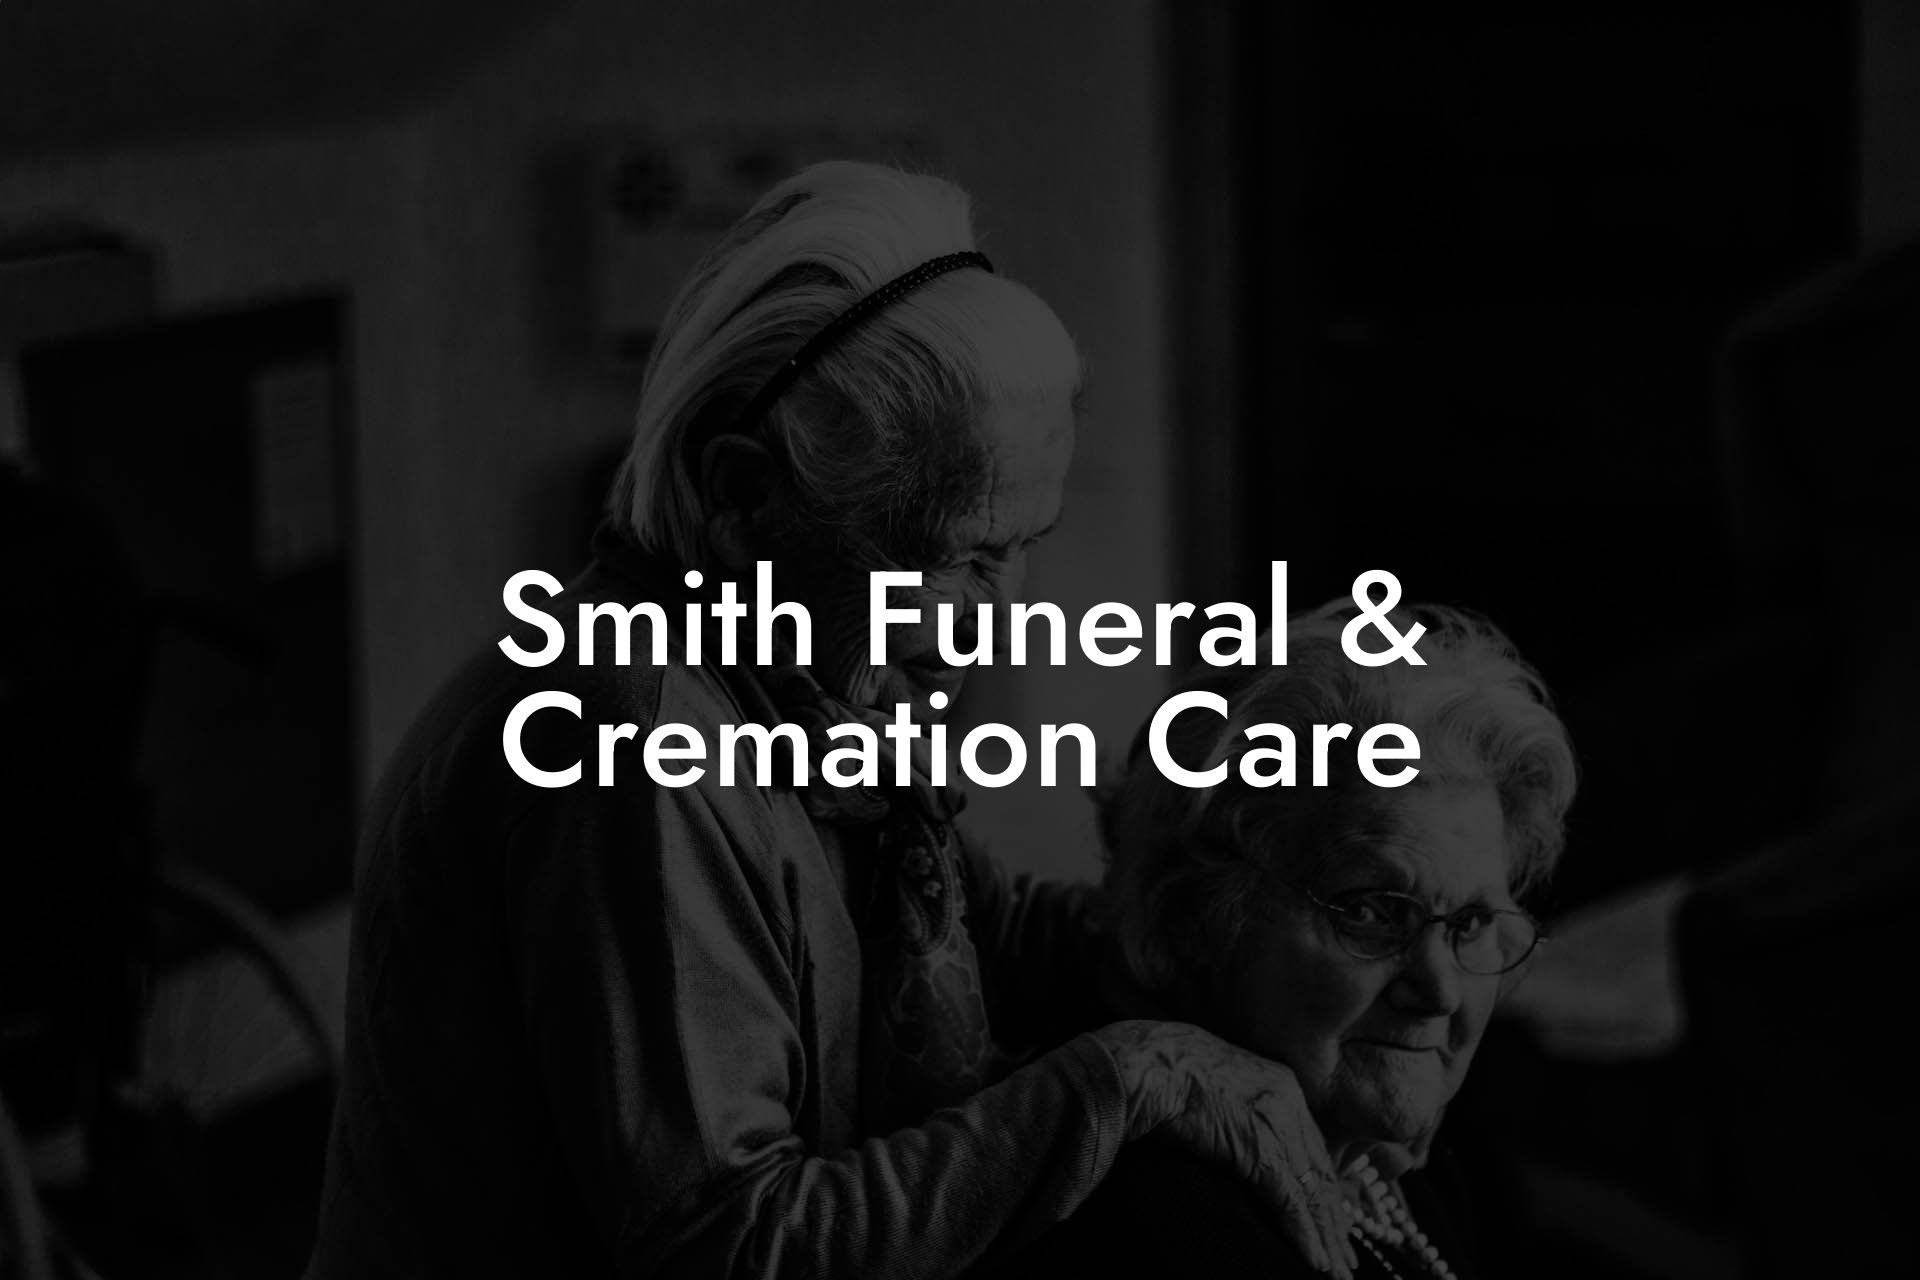 Smith Funeral & Cremation Care